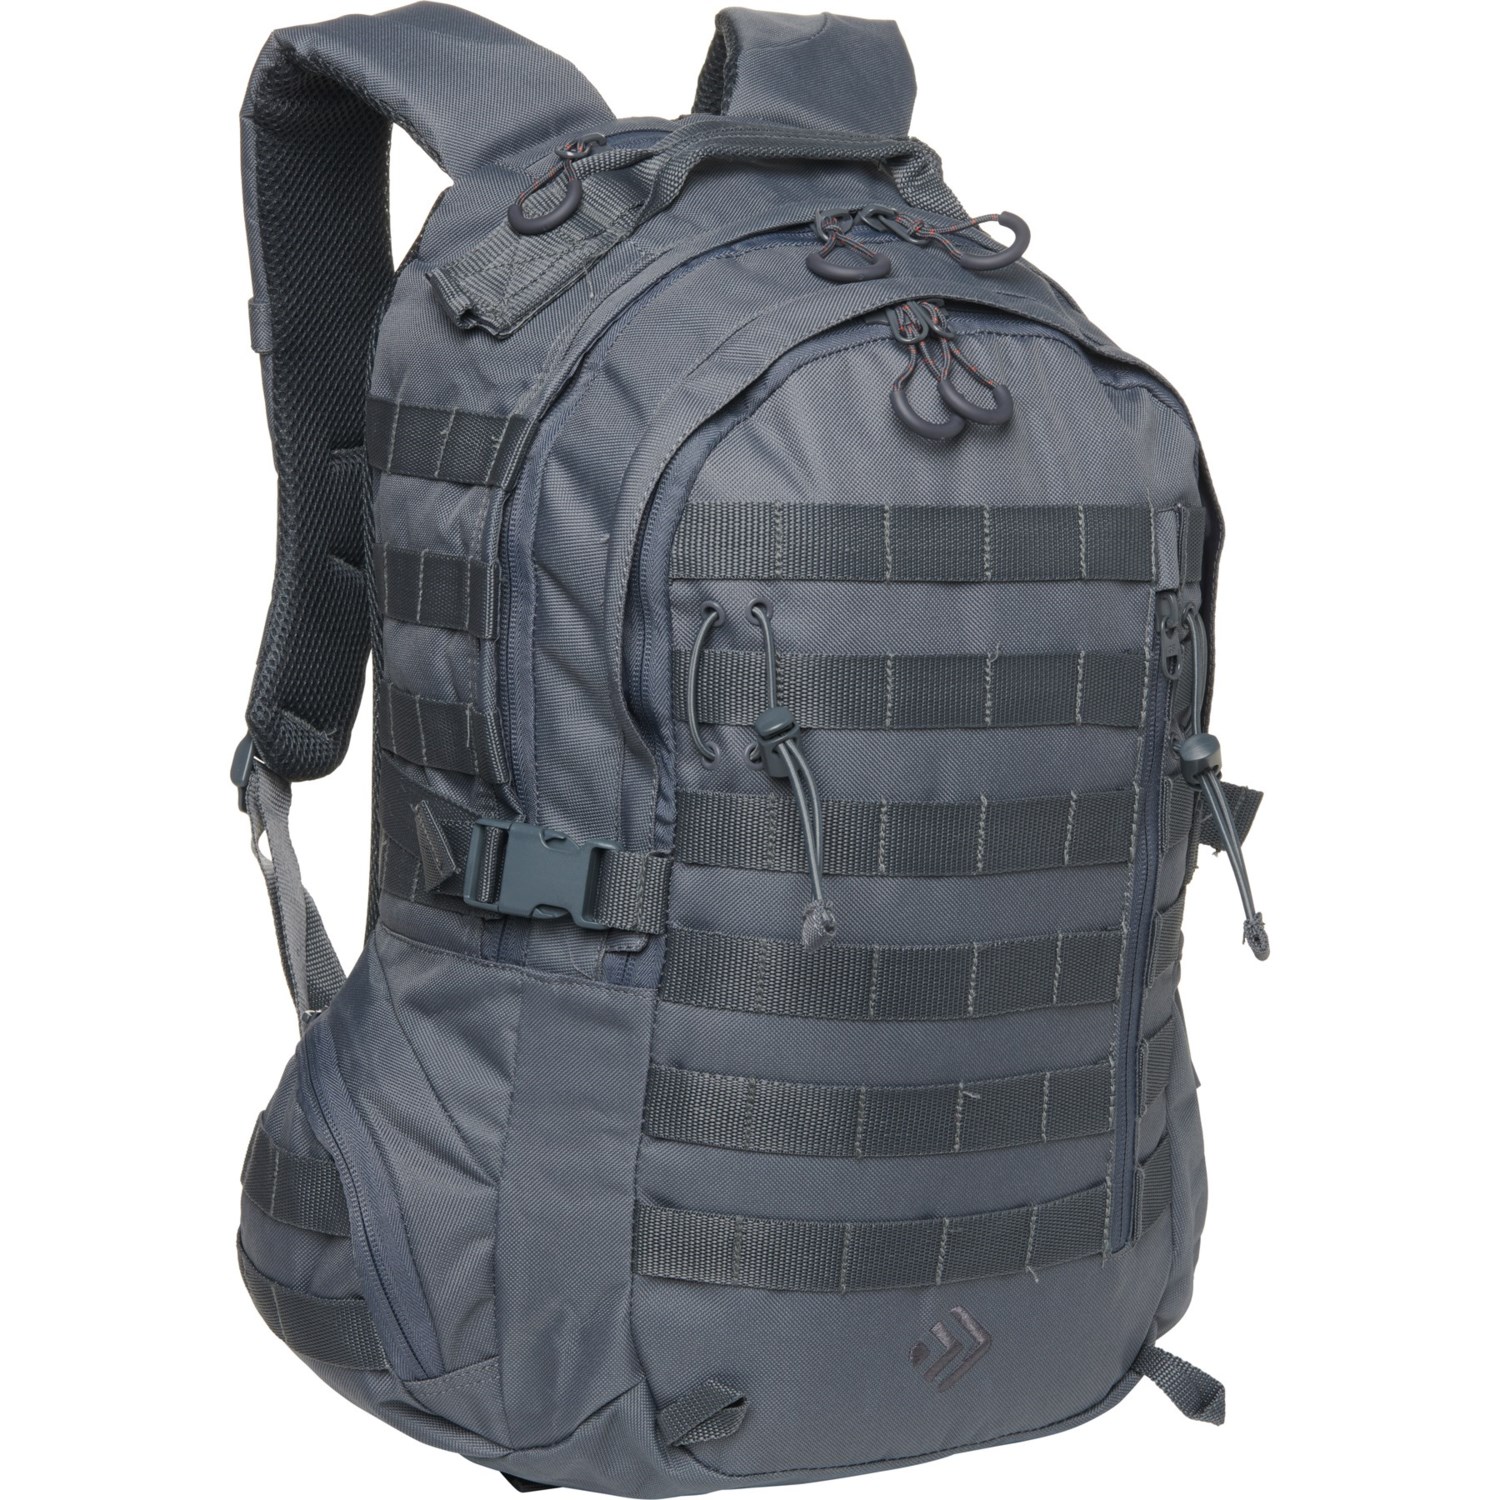 Outdoor Products Kennebec 29 L Backpack - Turbulence - Save 42%